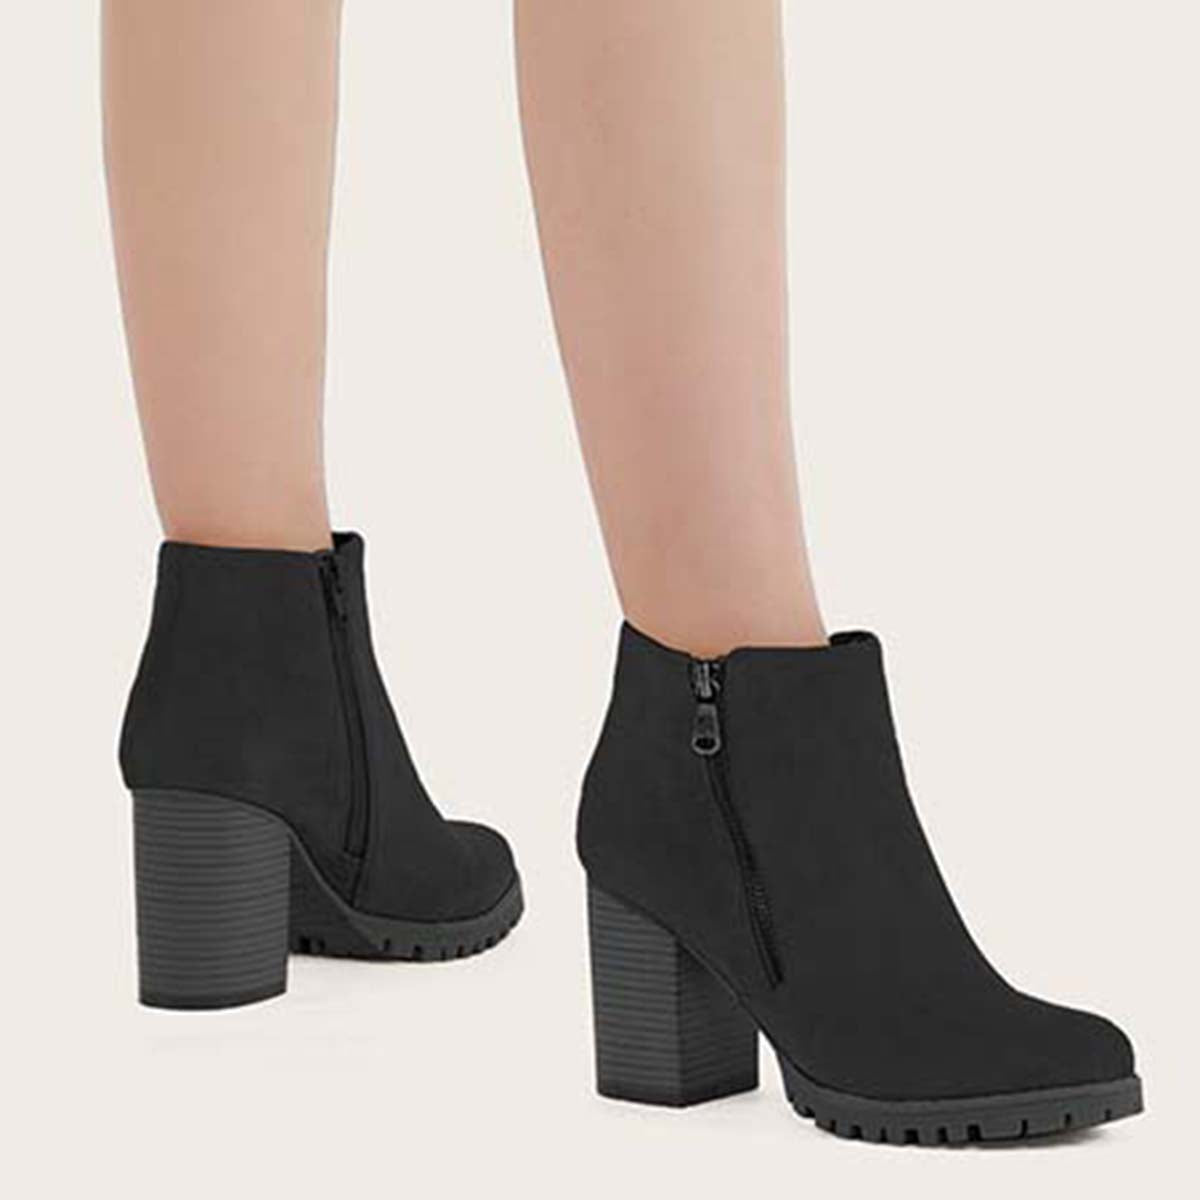 Veooy Black Chunky Heel Booties Round Toe Side Zip Ankle Boots